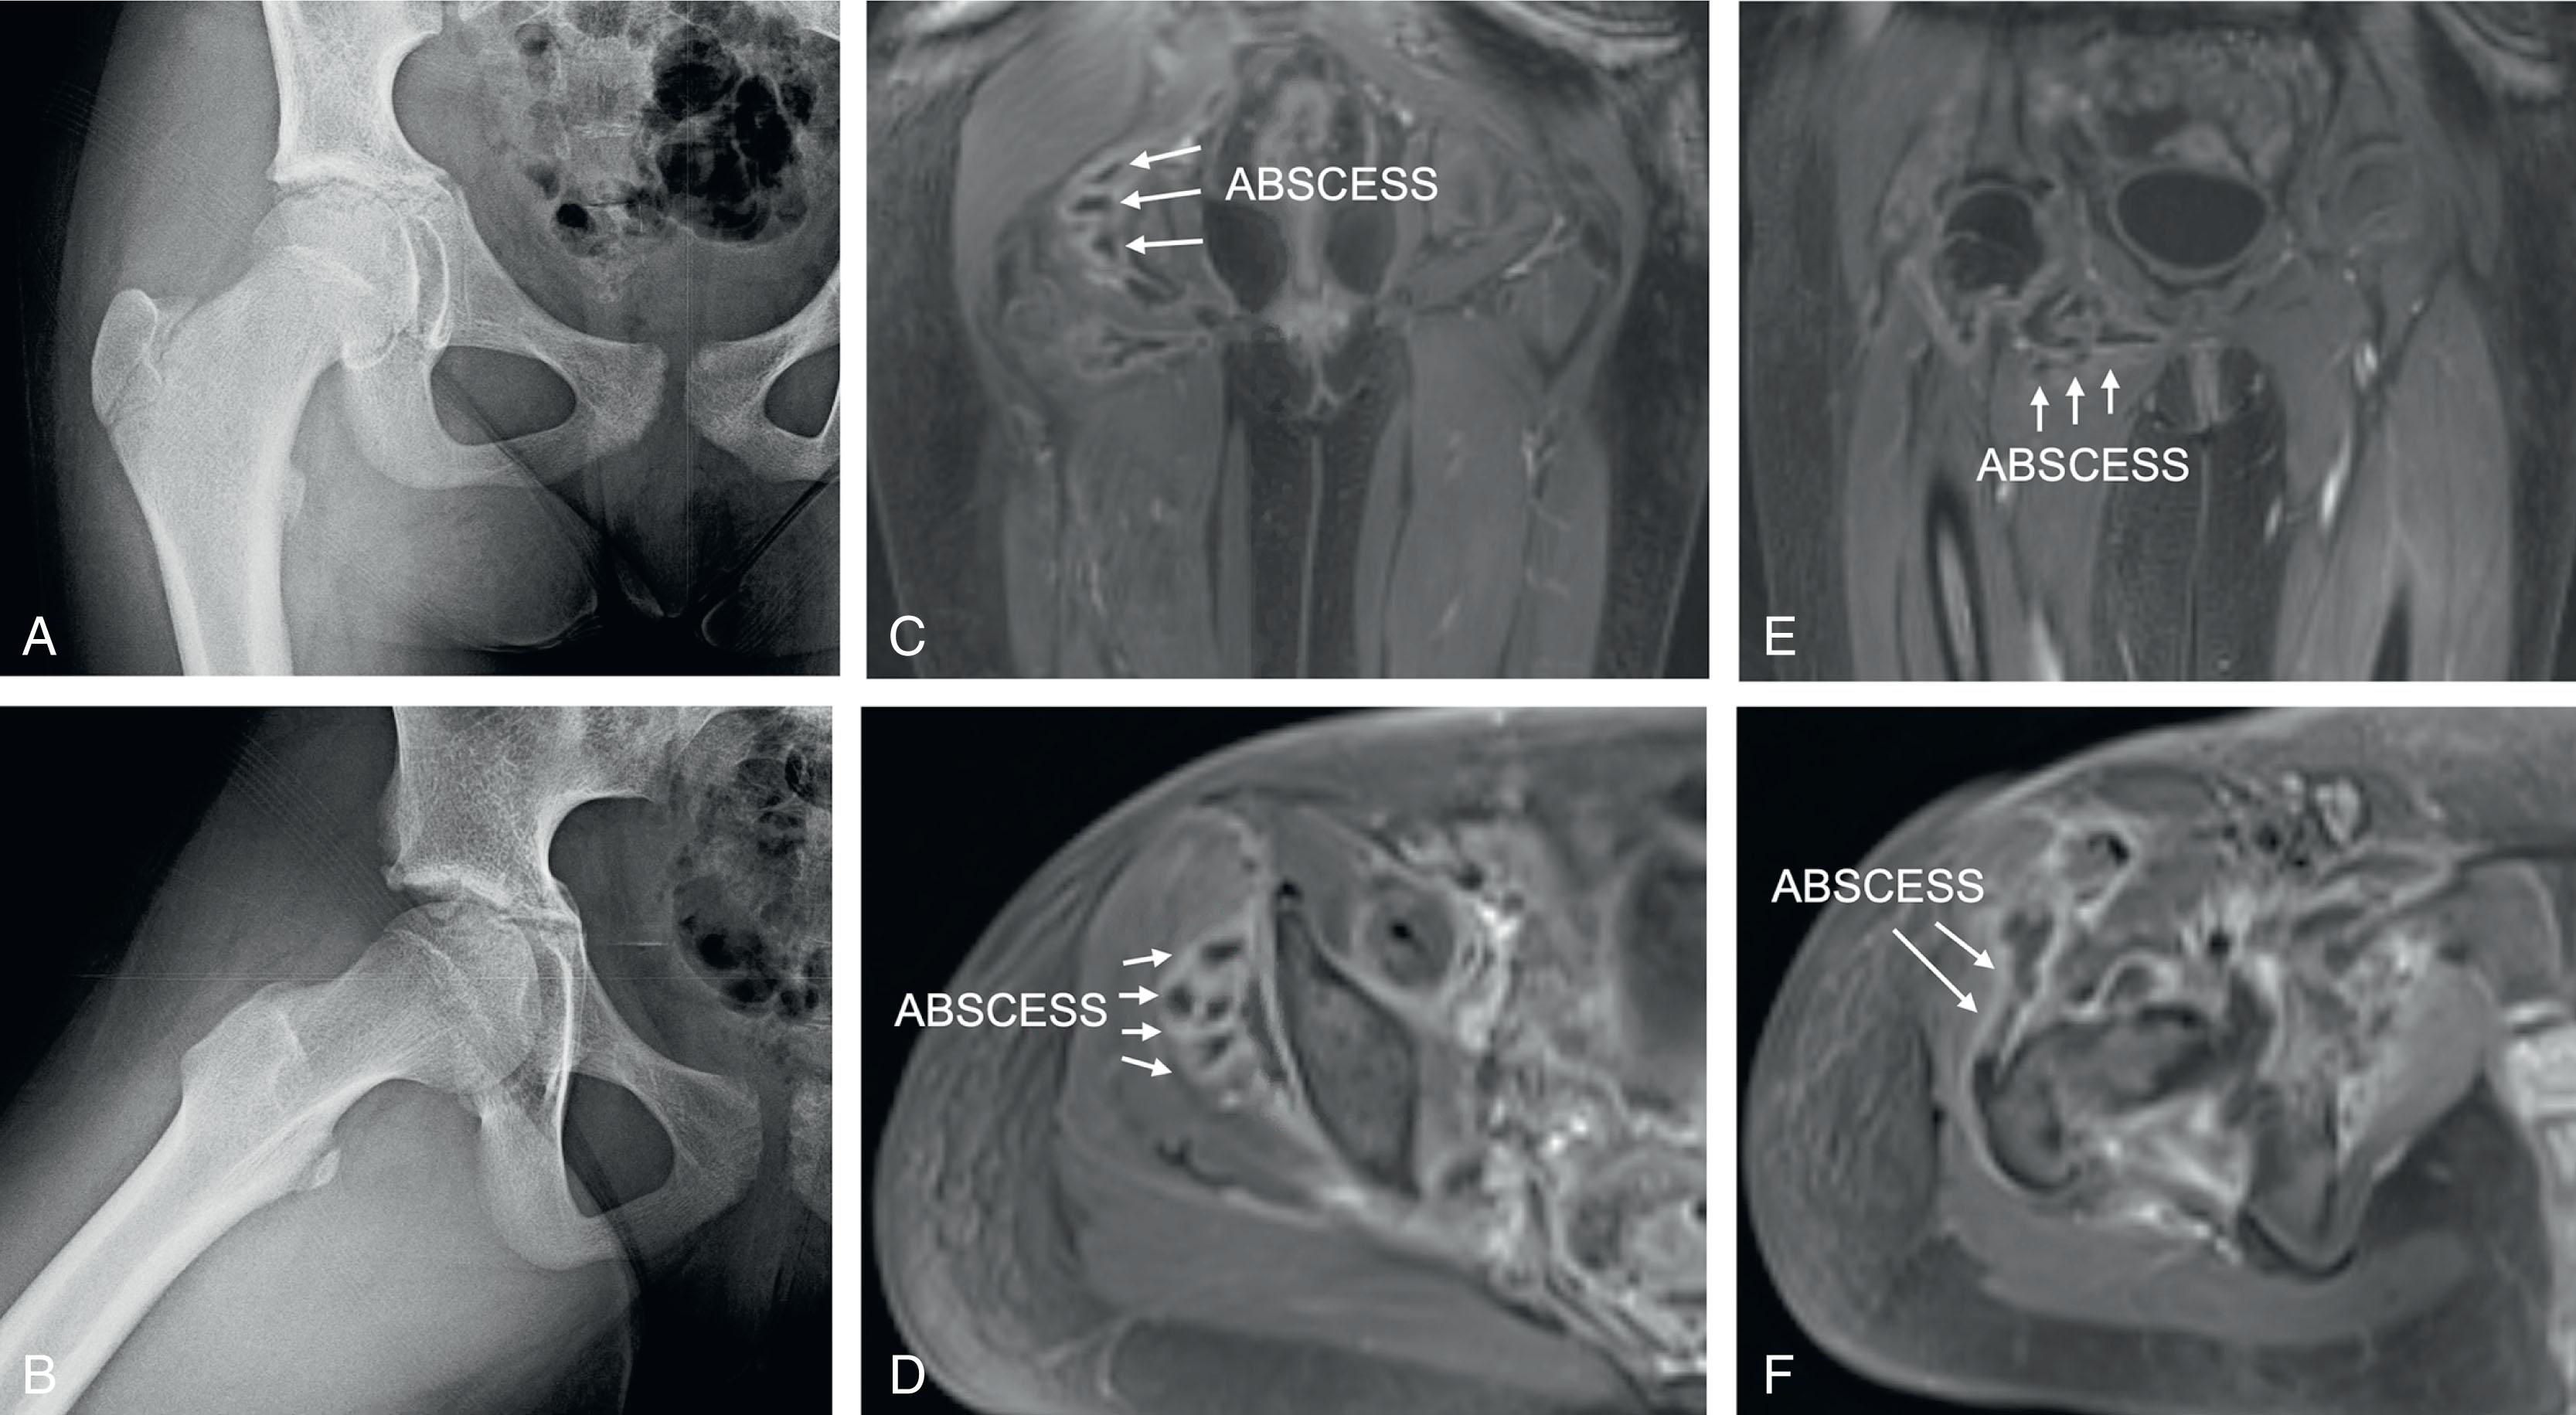 Fig. 25.4, Radiographs (A, B) and postcontrast coronal (C, E) and axial (D, F) T1 magnetic resonance imaging of the pelvis in an 11-year-old female treated for right septic arthritis of the hip with multiple associated gluteal (C, D) and obturator (E) abscesses. (F) Intra-articular extension of an abscess.